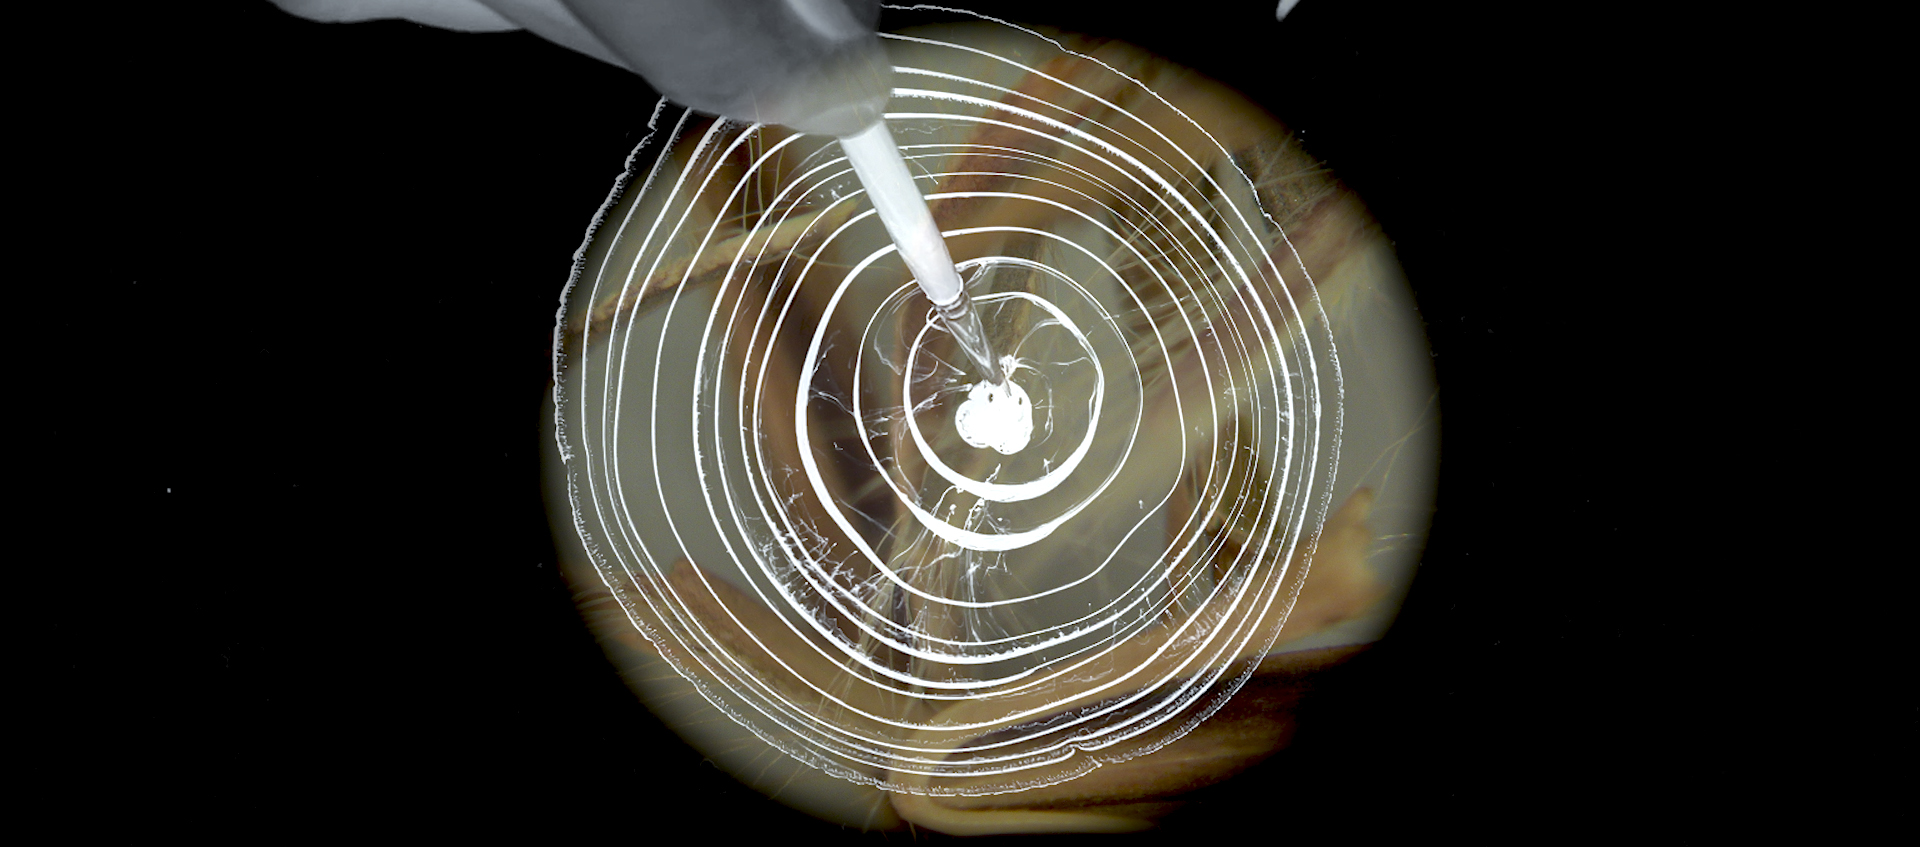 Concentric white circles are superimposed over a microscopic image of big bluestem seeds. A hand holds a paintbrush, which hovers over the center of the circles.